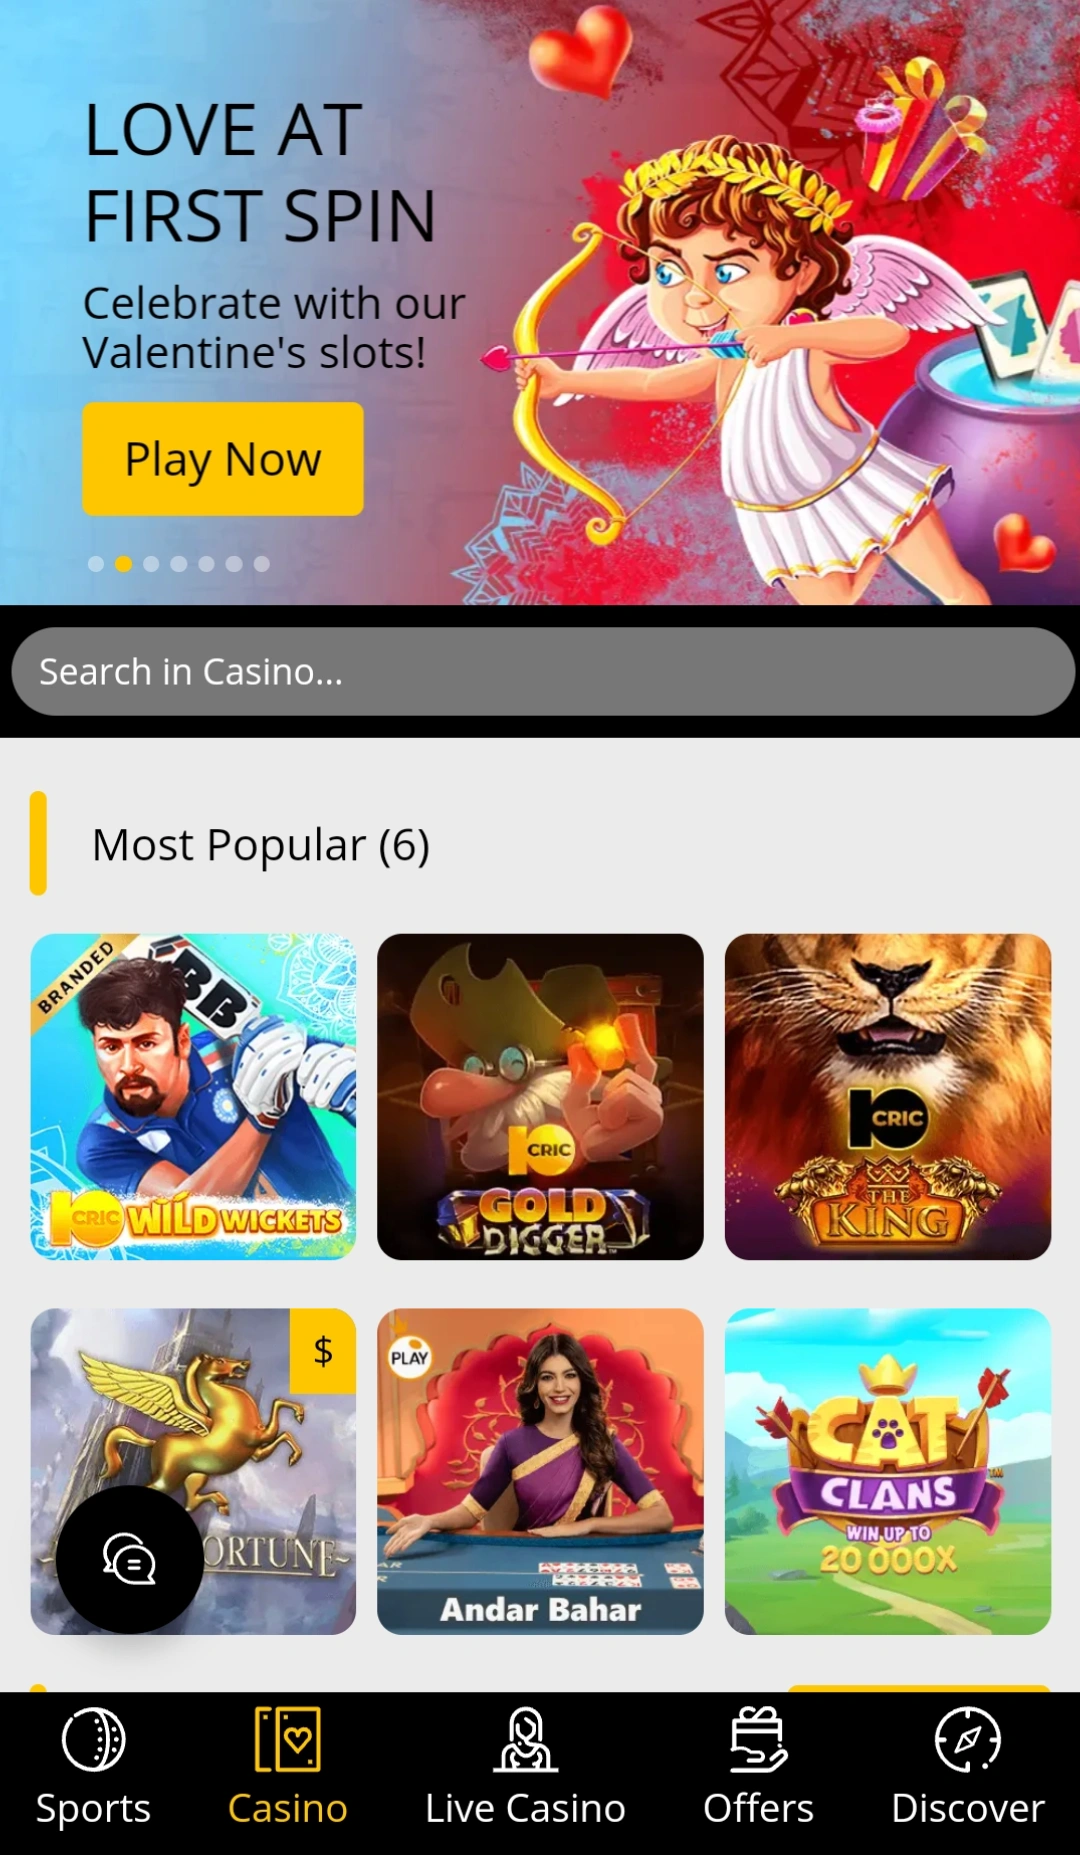 Online casino section with the most popular games